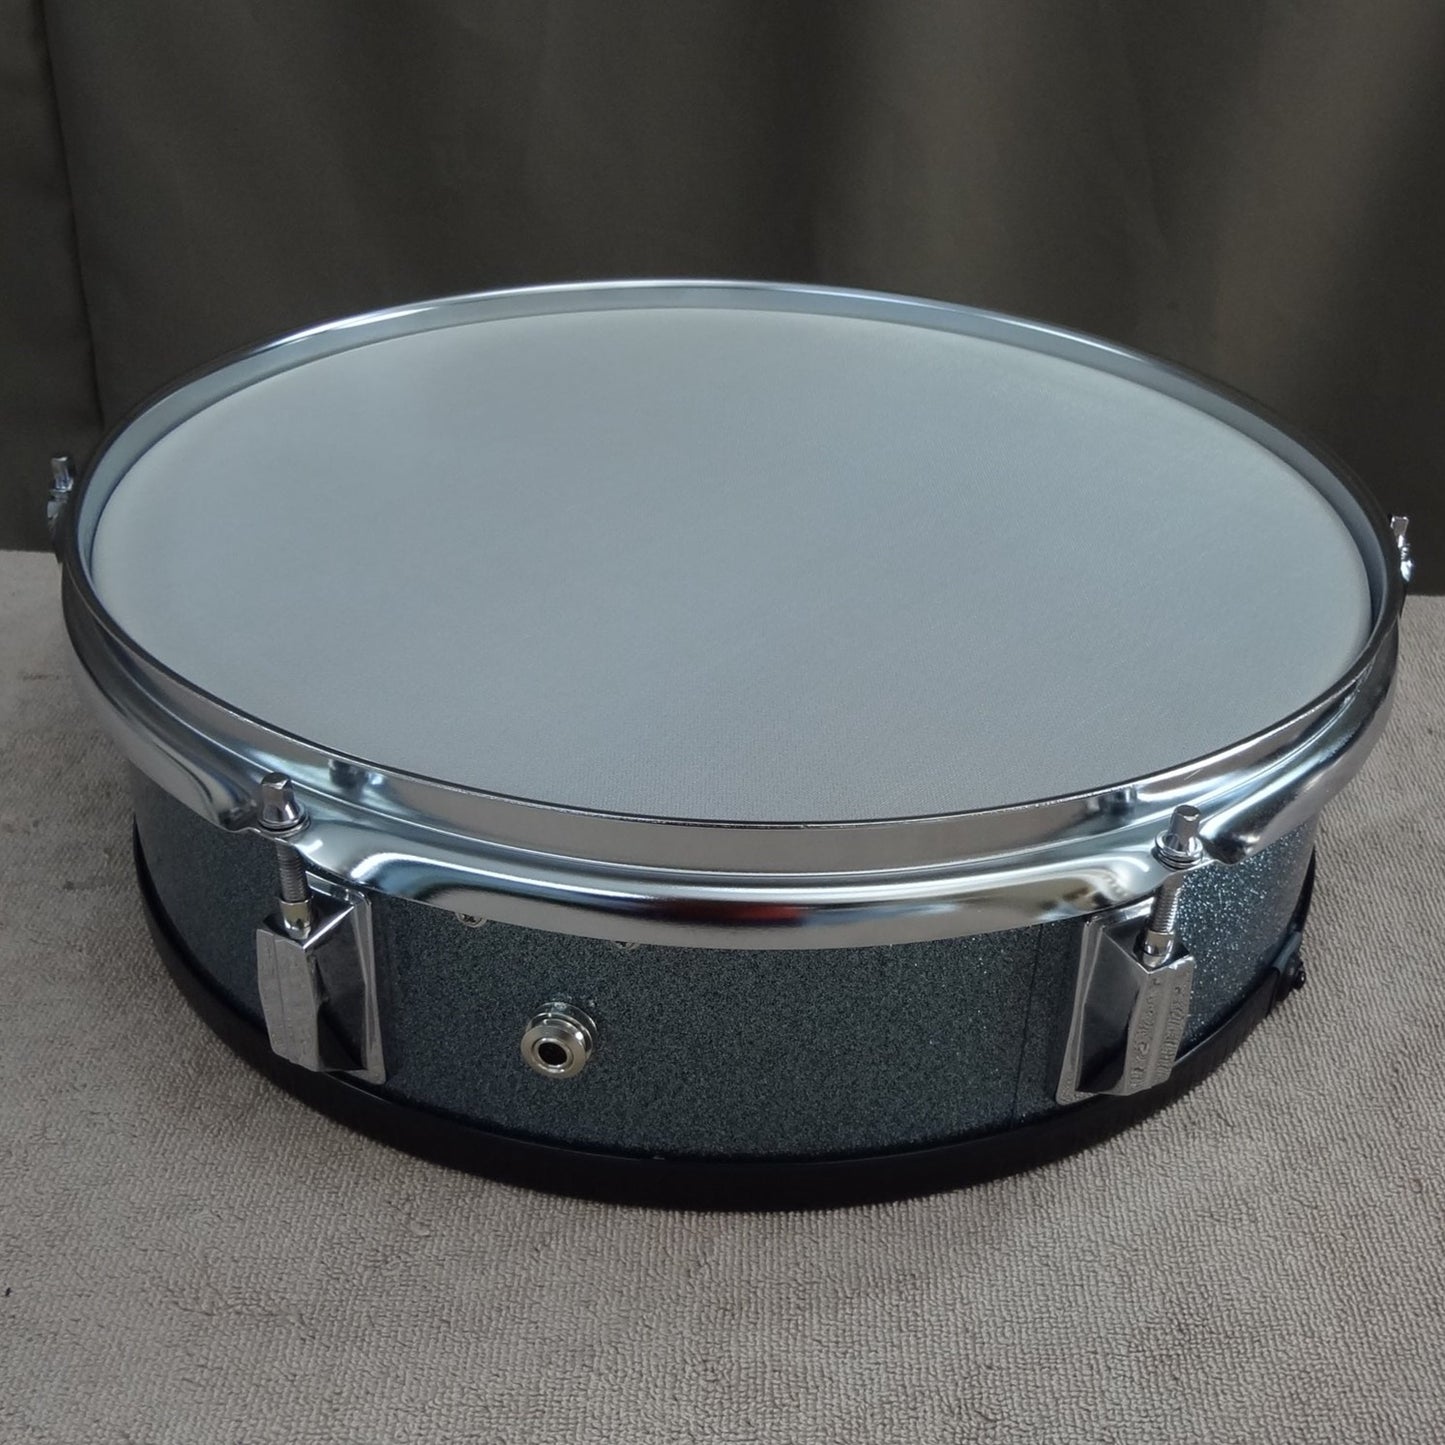 New 14 Inch Custom Electronic Snare Drum - Teal Green Sparkle